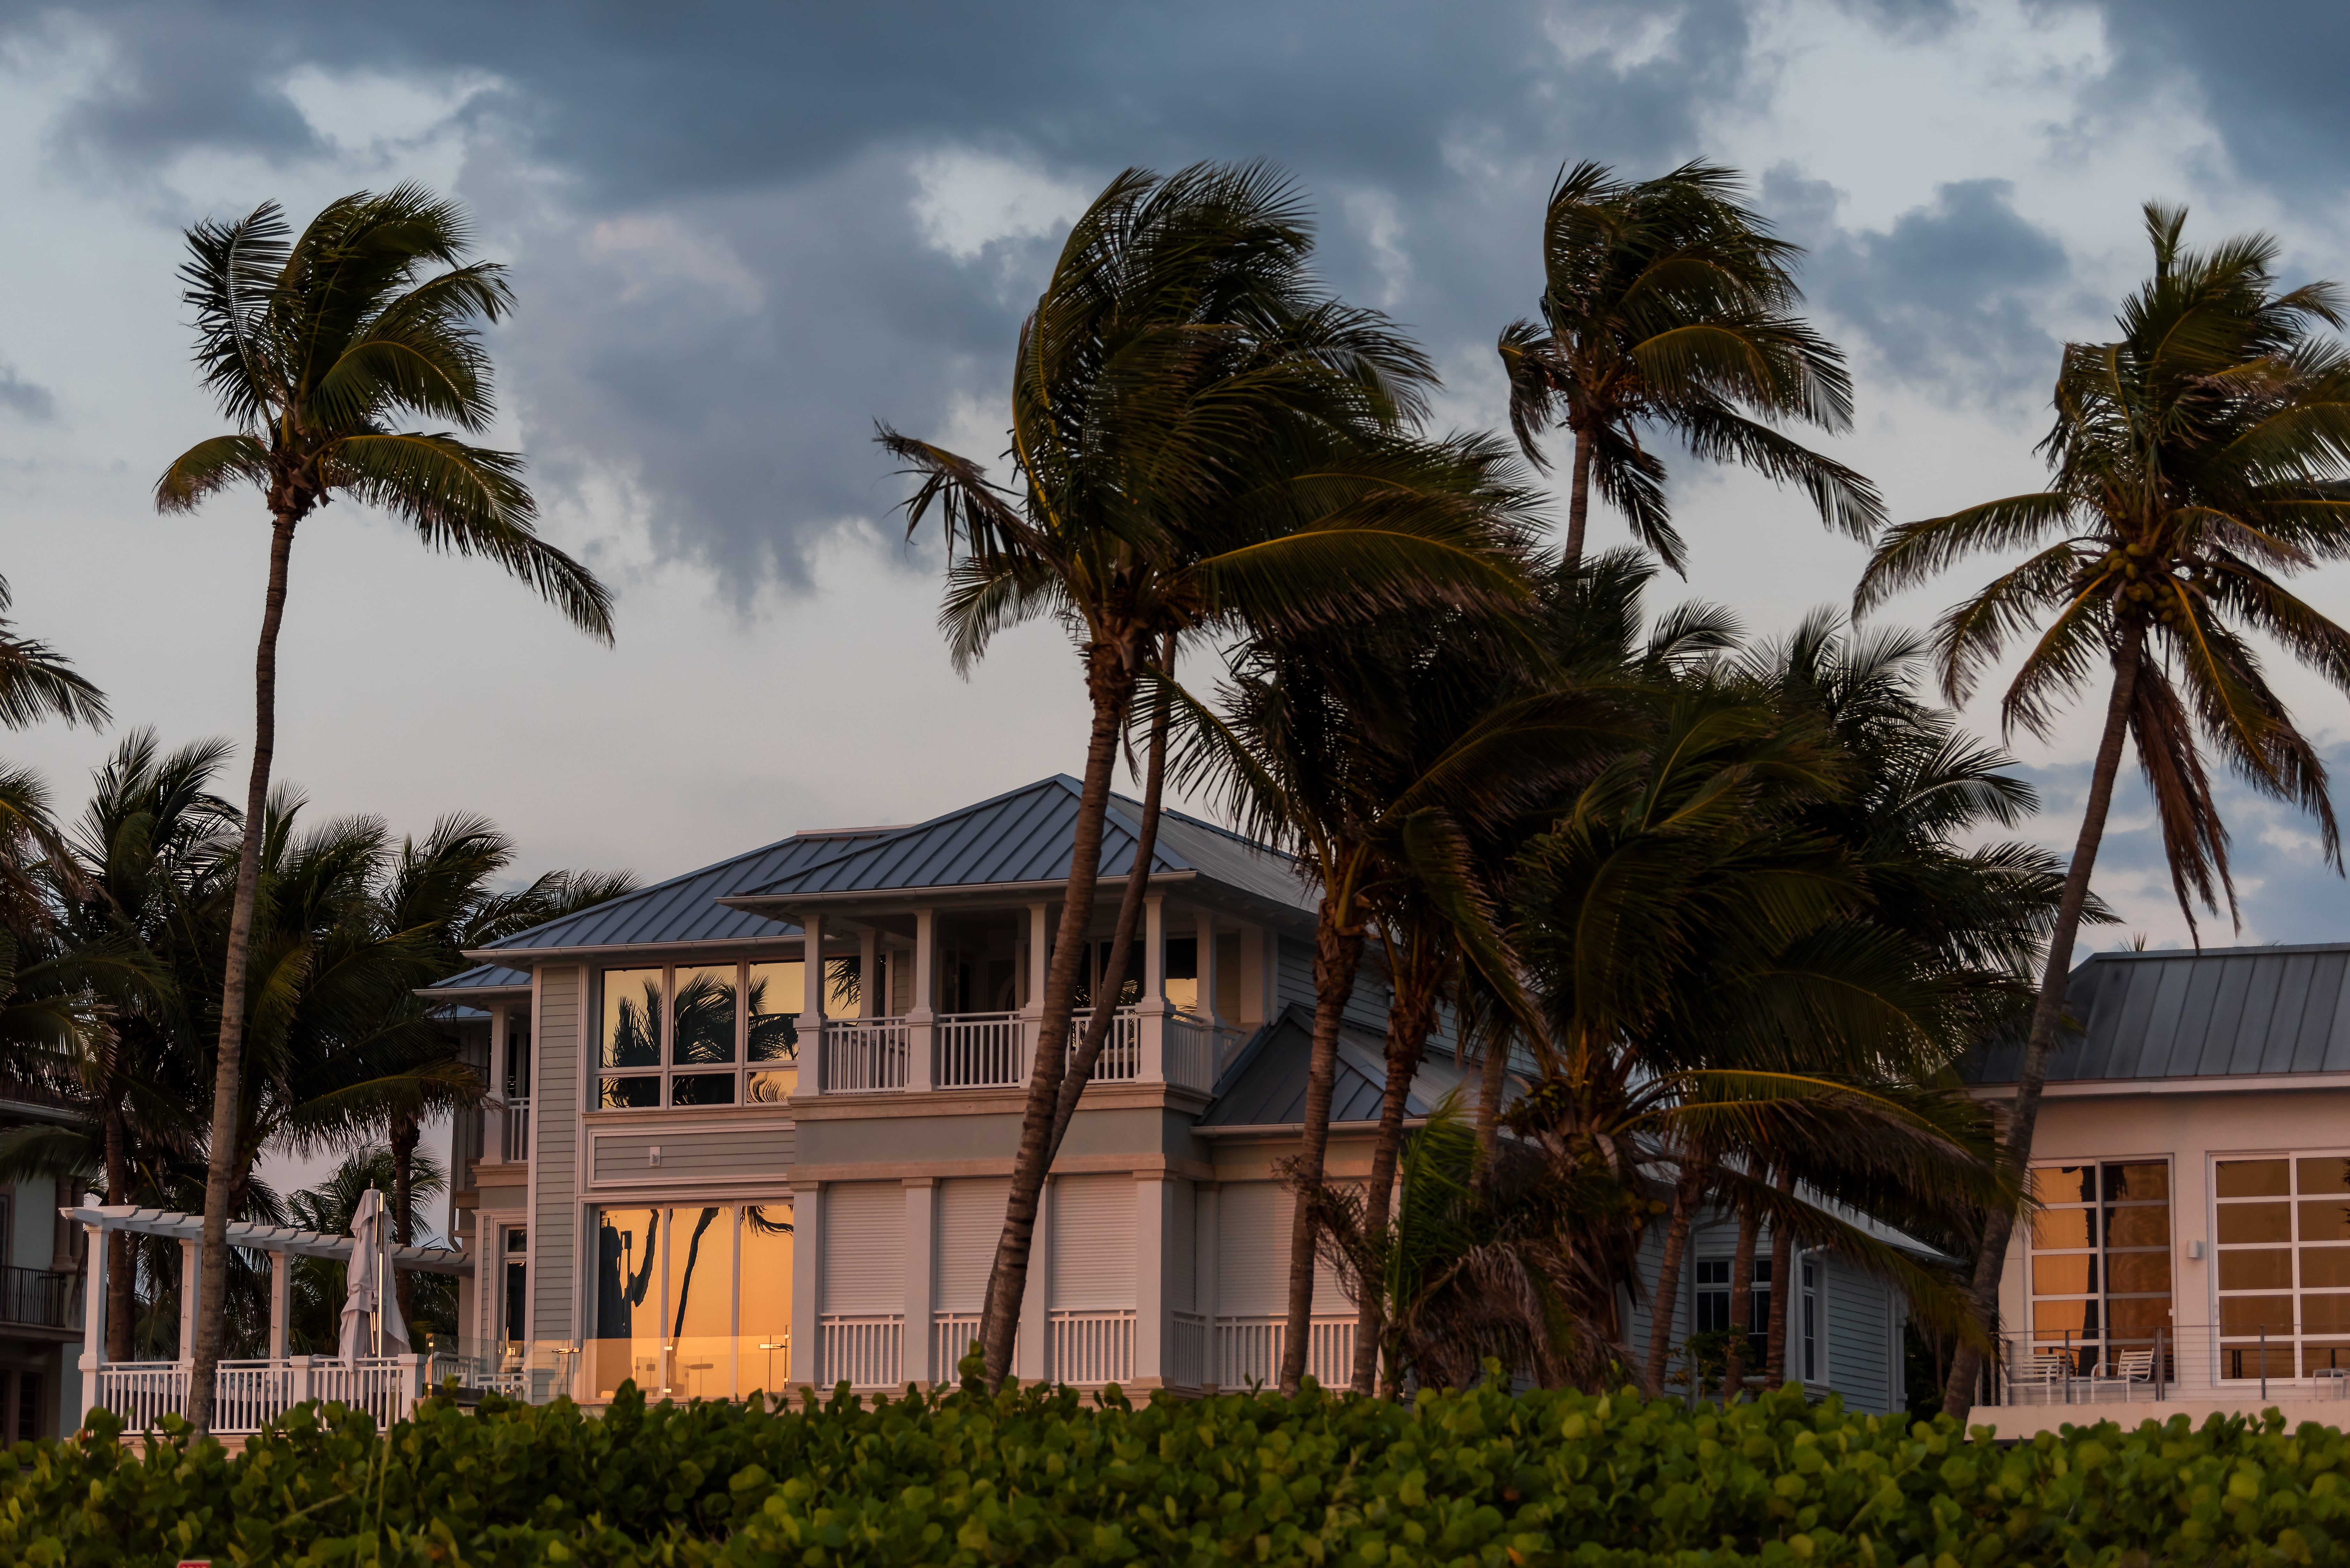 A house under stormy skies surrounded by palm trees bending in the wind